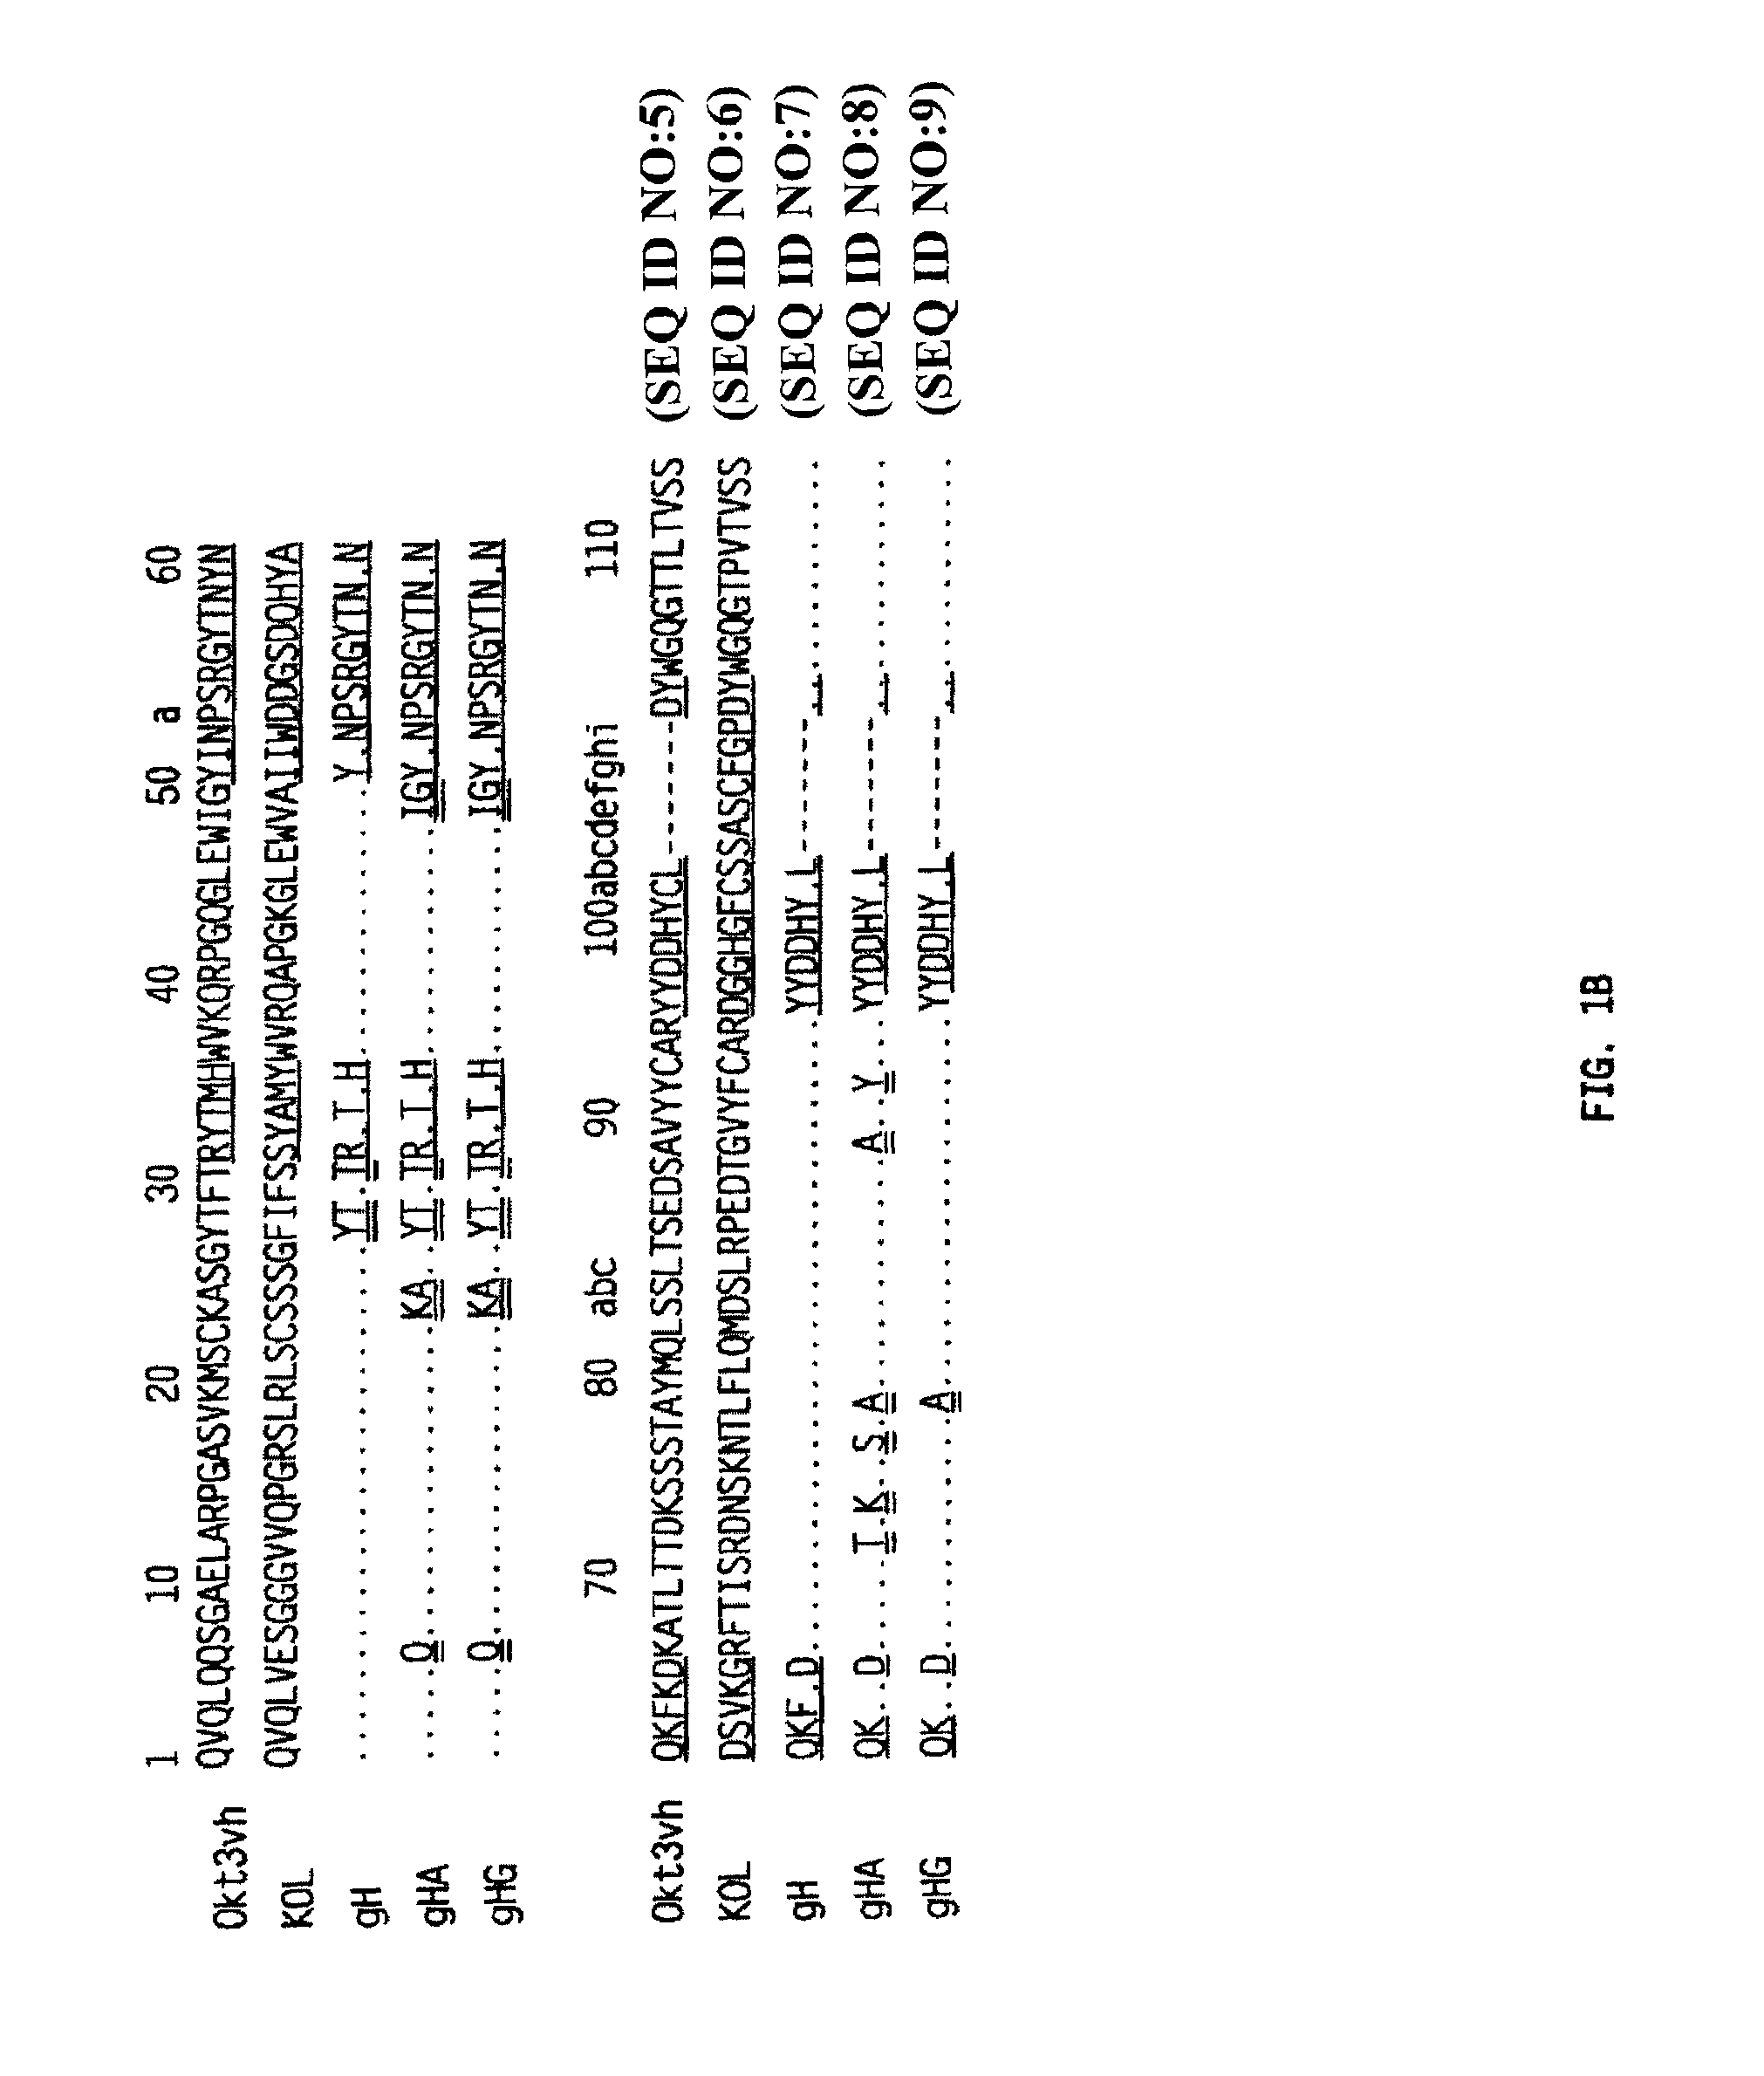 Methods for the treatment of autoimmune disorders using immunosuppressive monoclonal antibodies with reduced toxicity